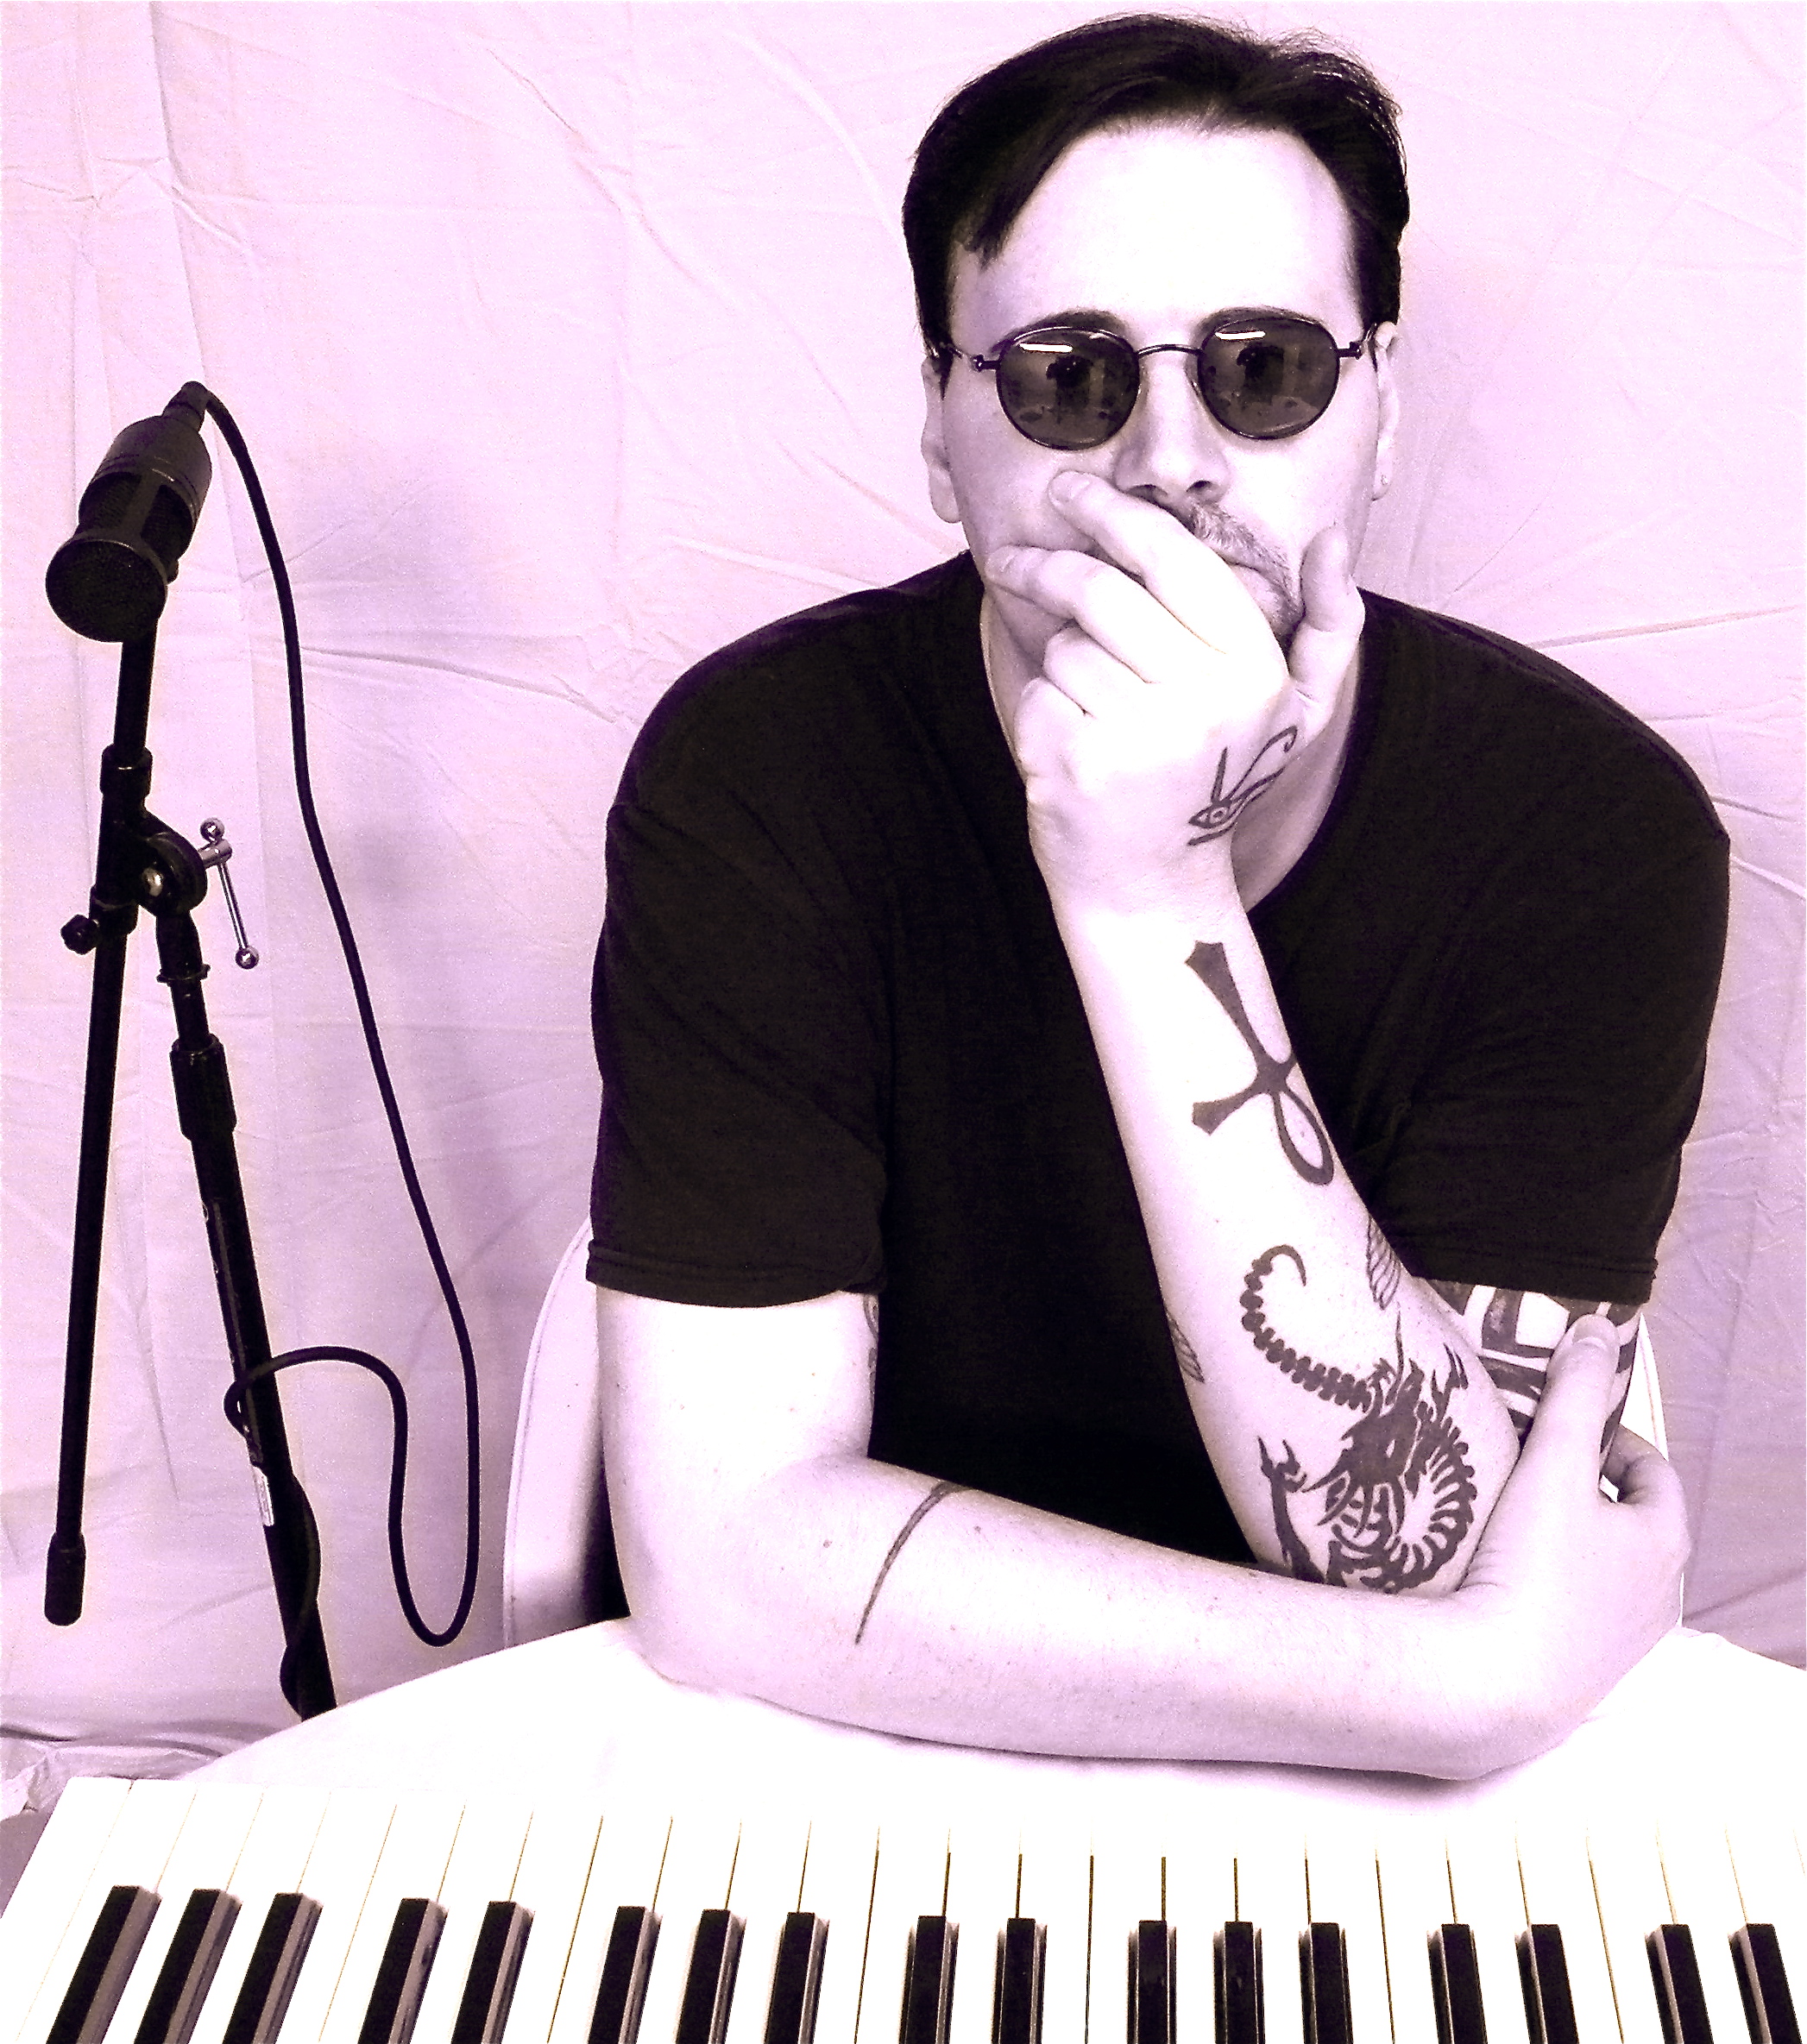 Martin Birke is an American composer and electronic percussionist.